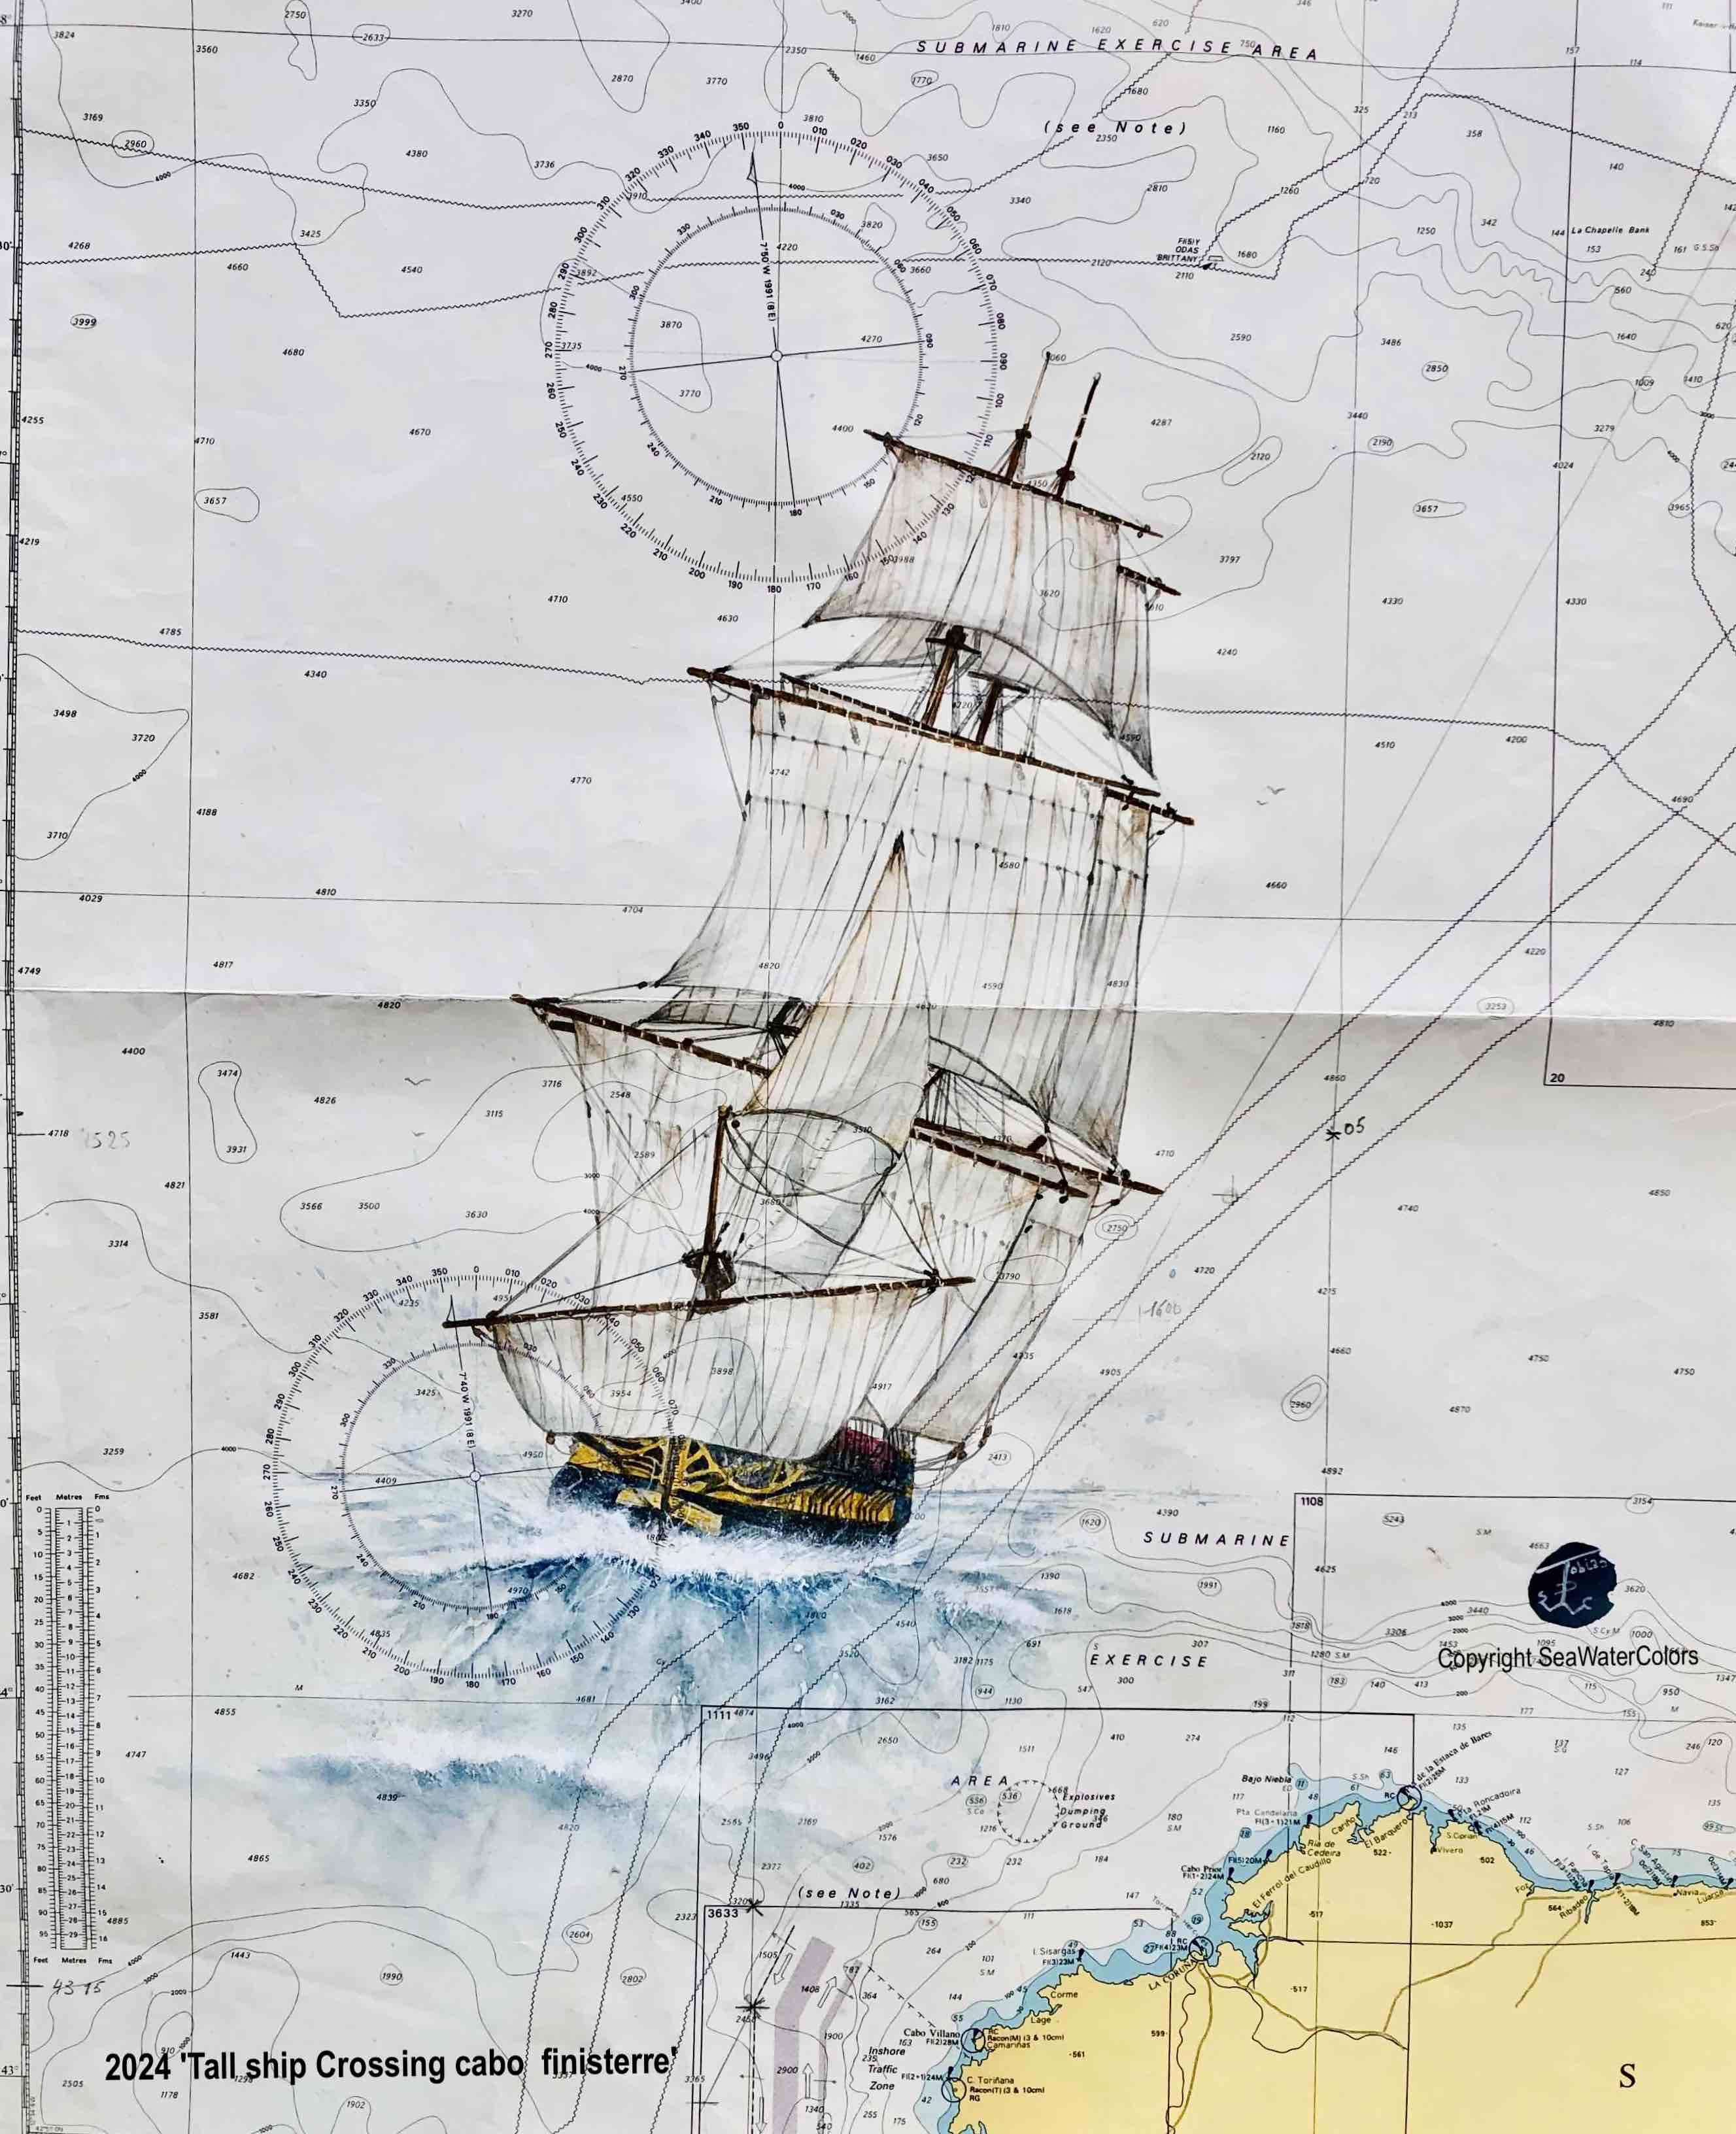 2024 'Tall ship Crossing cabo  finisterre' Nautical chart 60-50 cm.jpeg